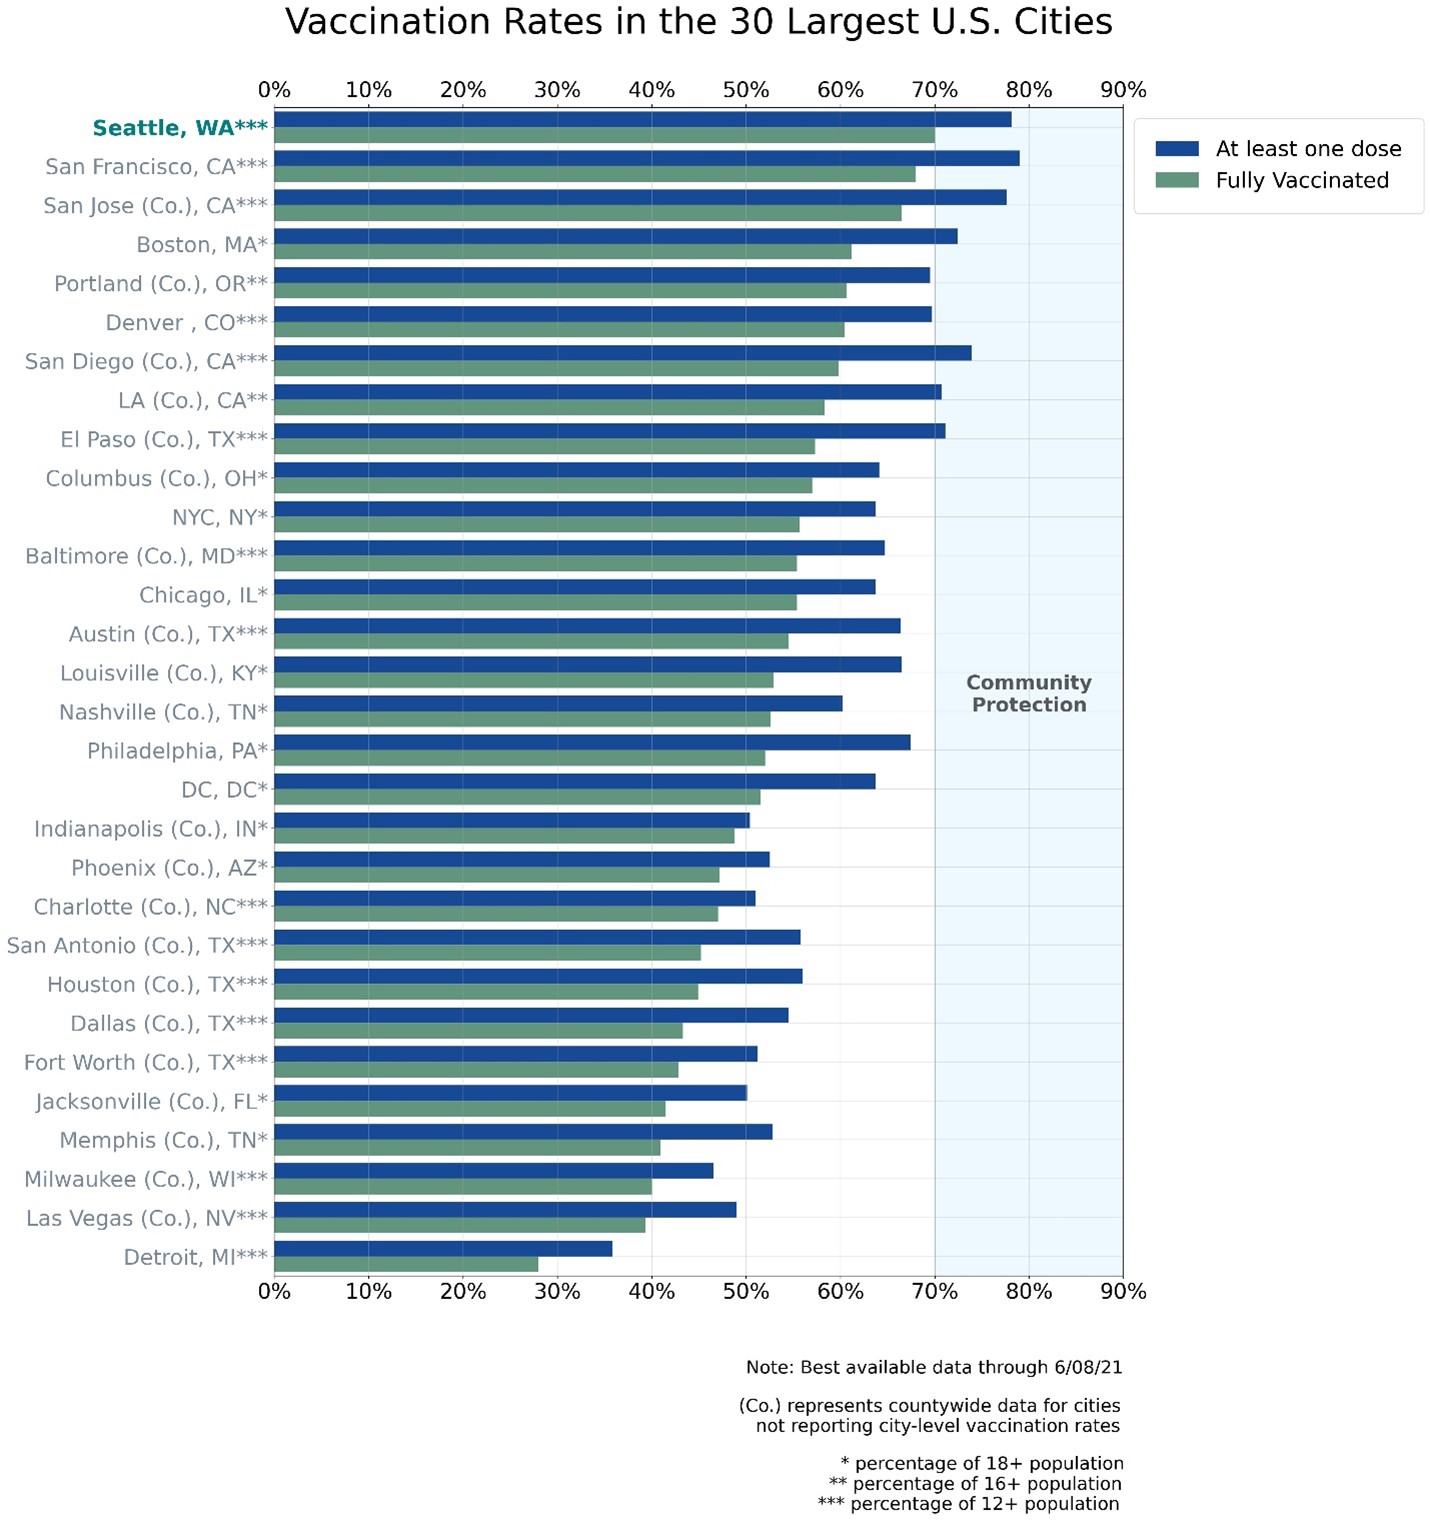 Chart of Vaccination Rates in 30 Largest U.S. Cities showing Seattle as first city to reach 70% fully vaccinated